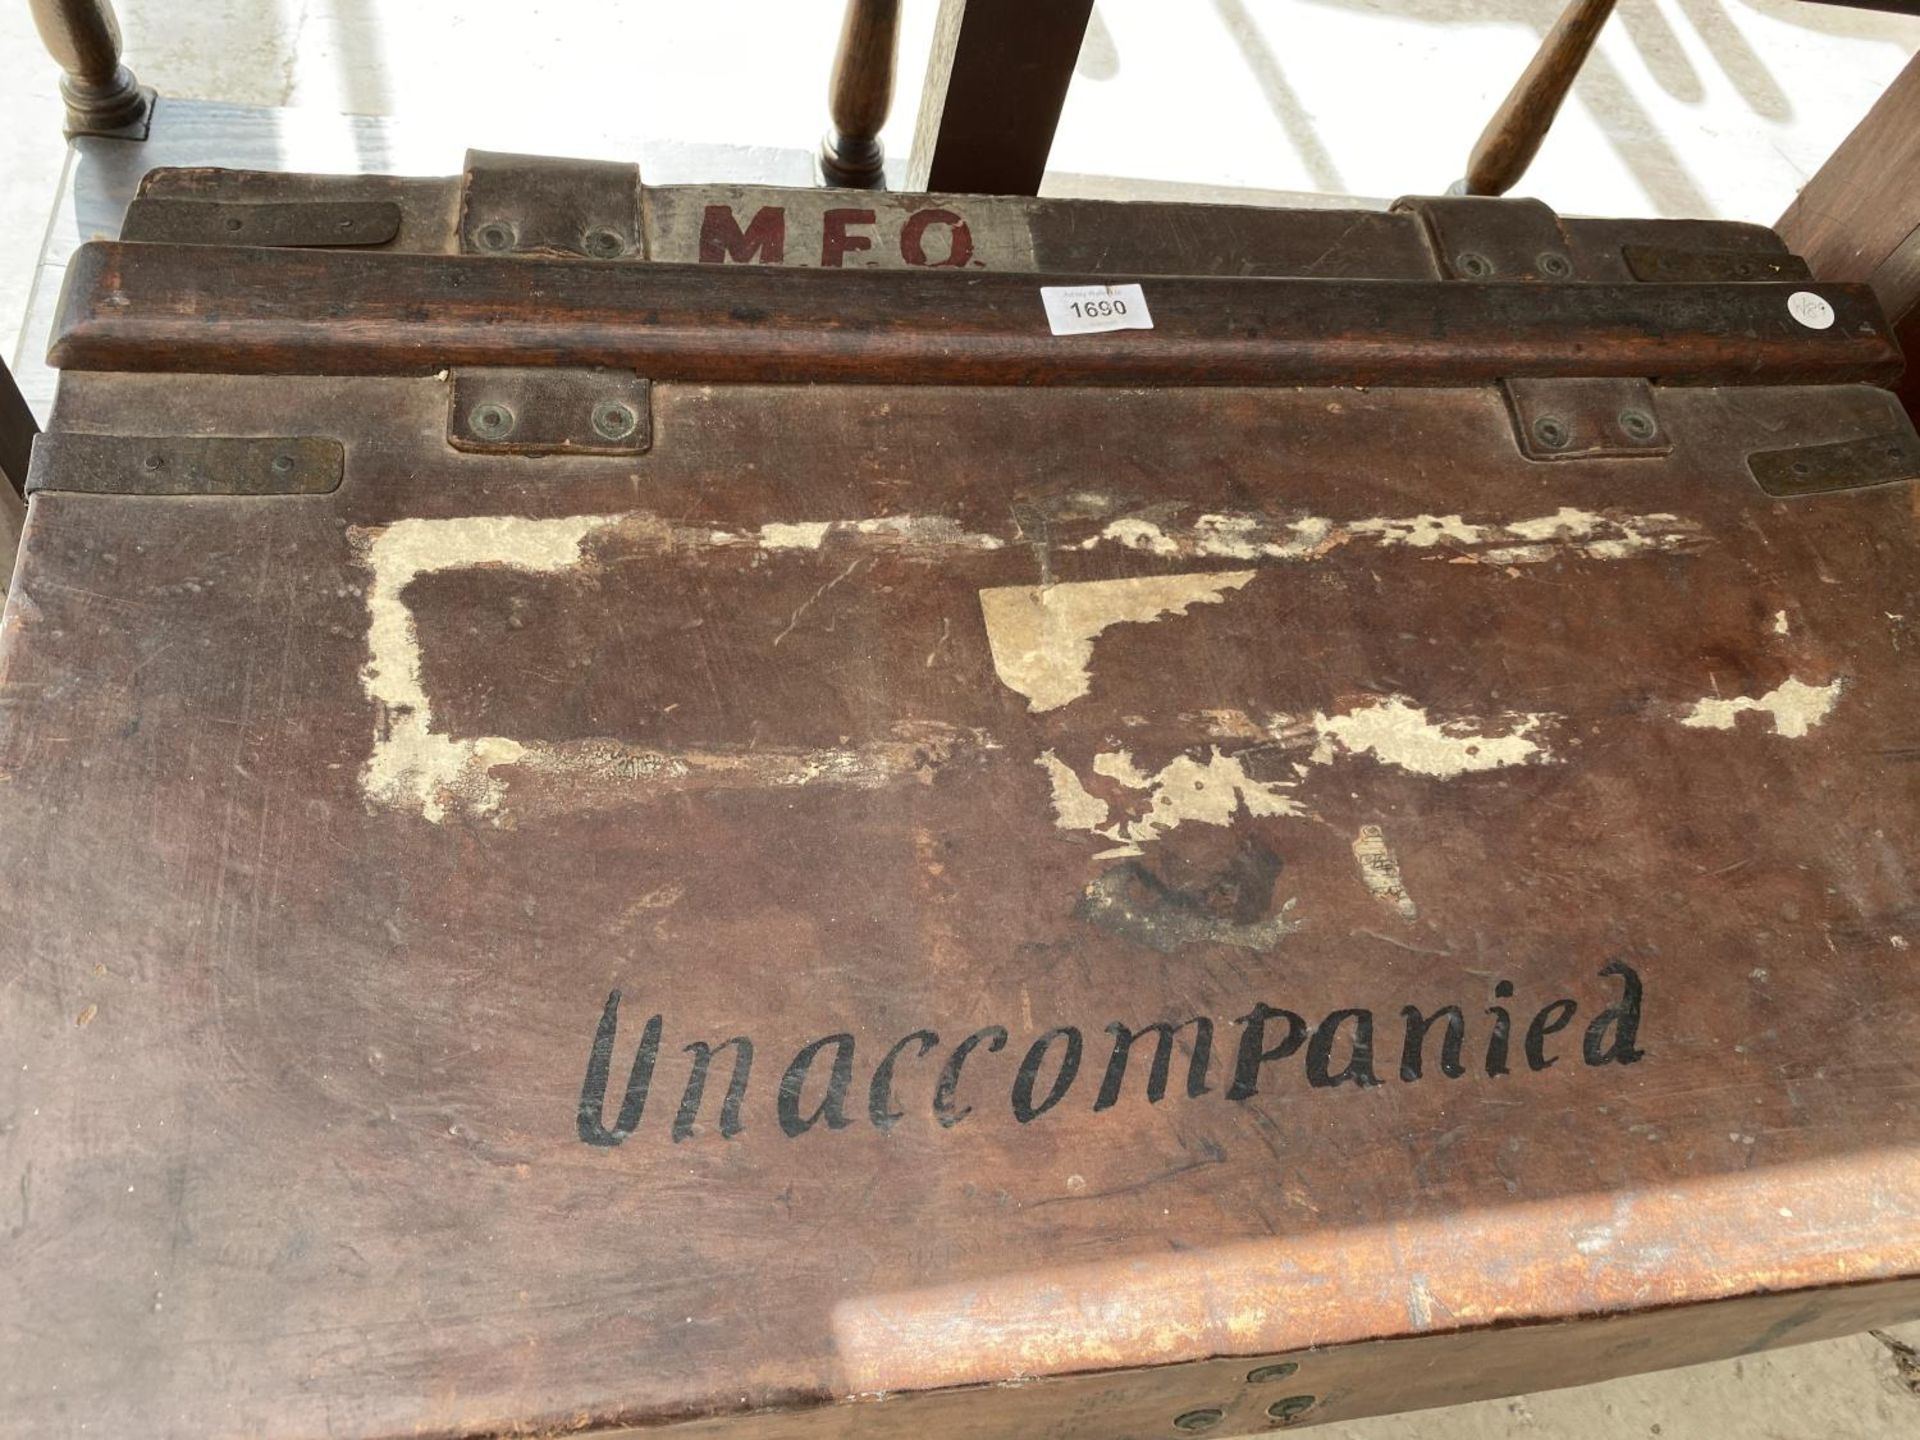 A 19TH CENTURY LEATHER OFFICERS TRAVELLING TRUNK (LT N.M.WATSON C/O MFOPODUK), ALSO INSCRIBED - Image 2 of 4